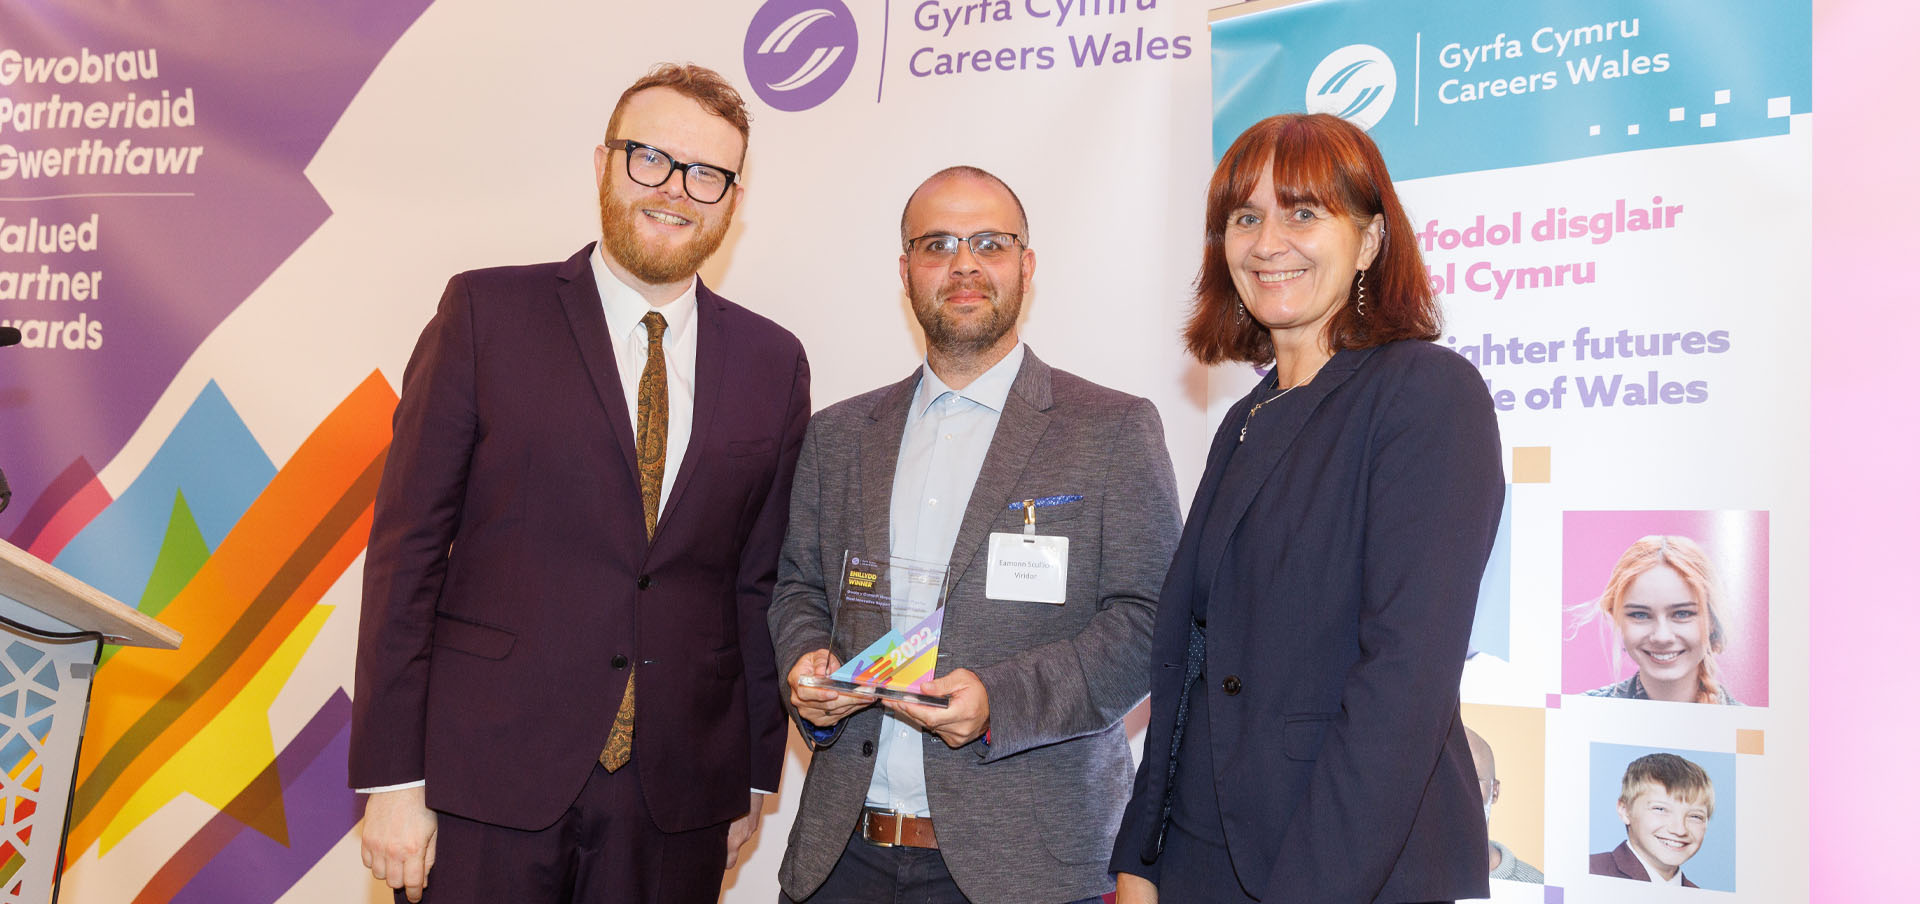 Eamonn Scullion from Viridor being presented with their award by presenter Huw Stephens and Nikki Lawrence, Chief Executive, Careers Wales